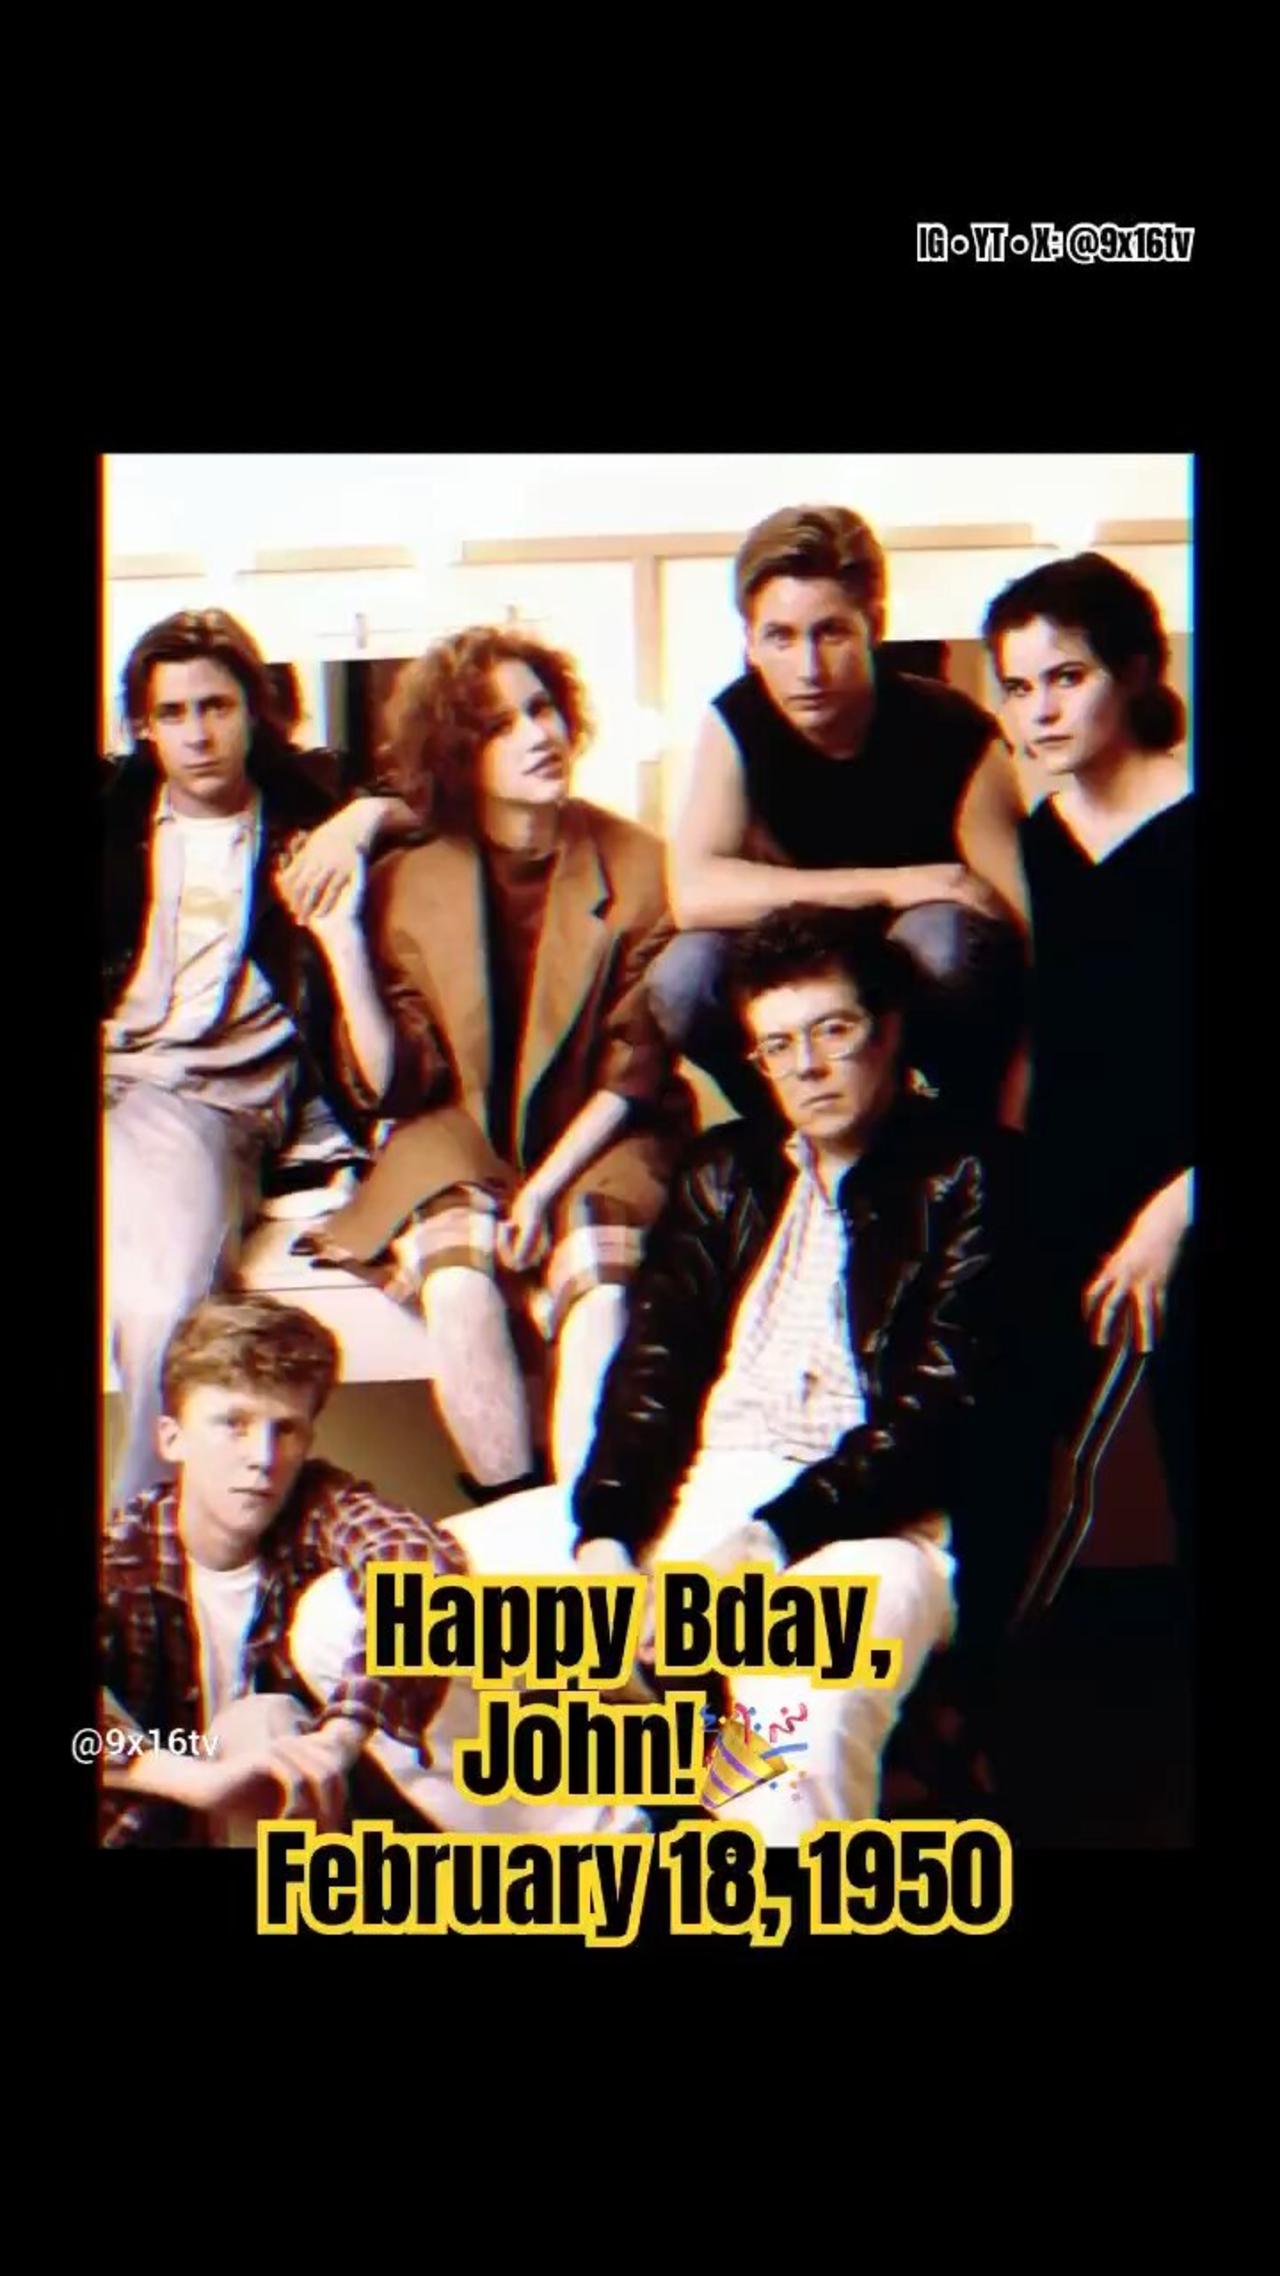 John Hughes, the Legendary Filmmaker and Creator of Iconic 80s Teen Movies, Celebrates His 74th Bday